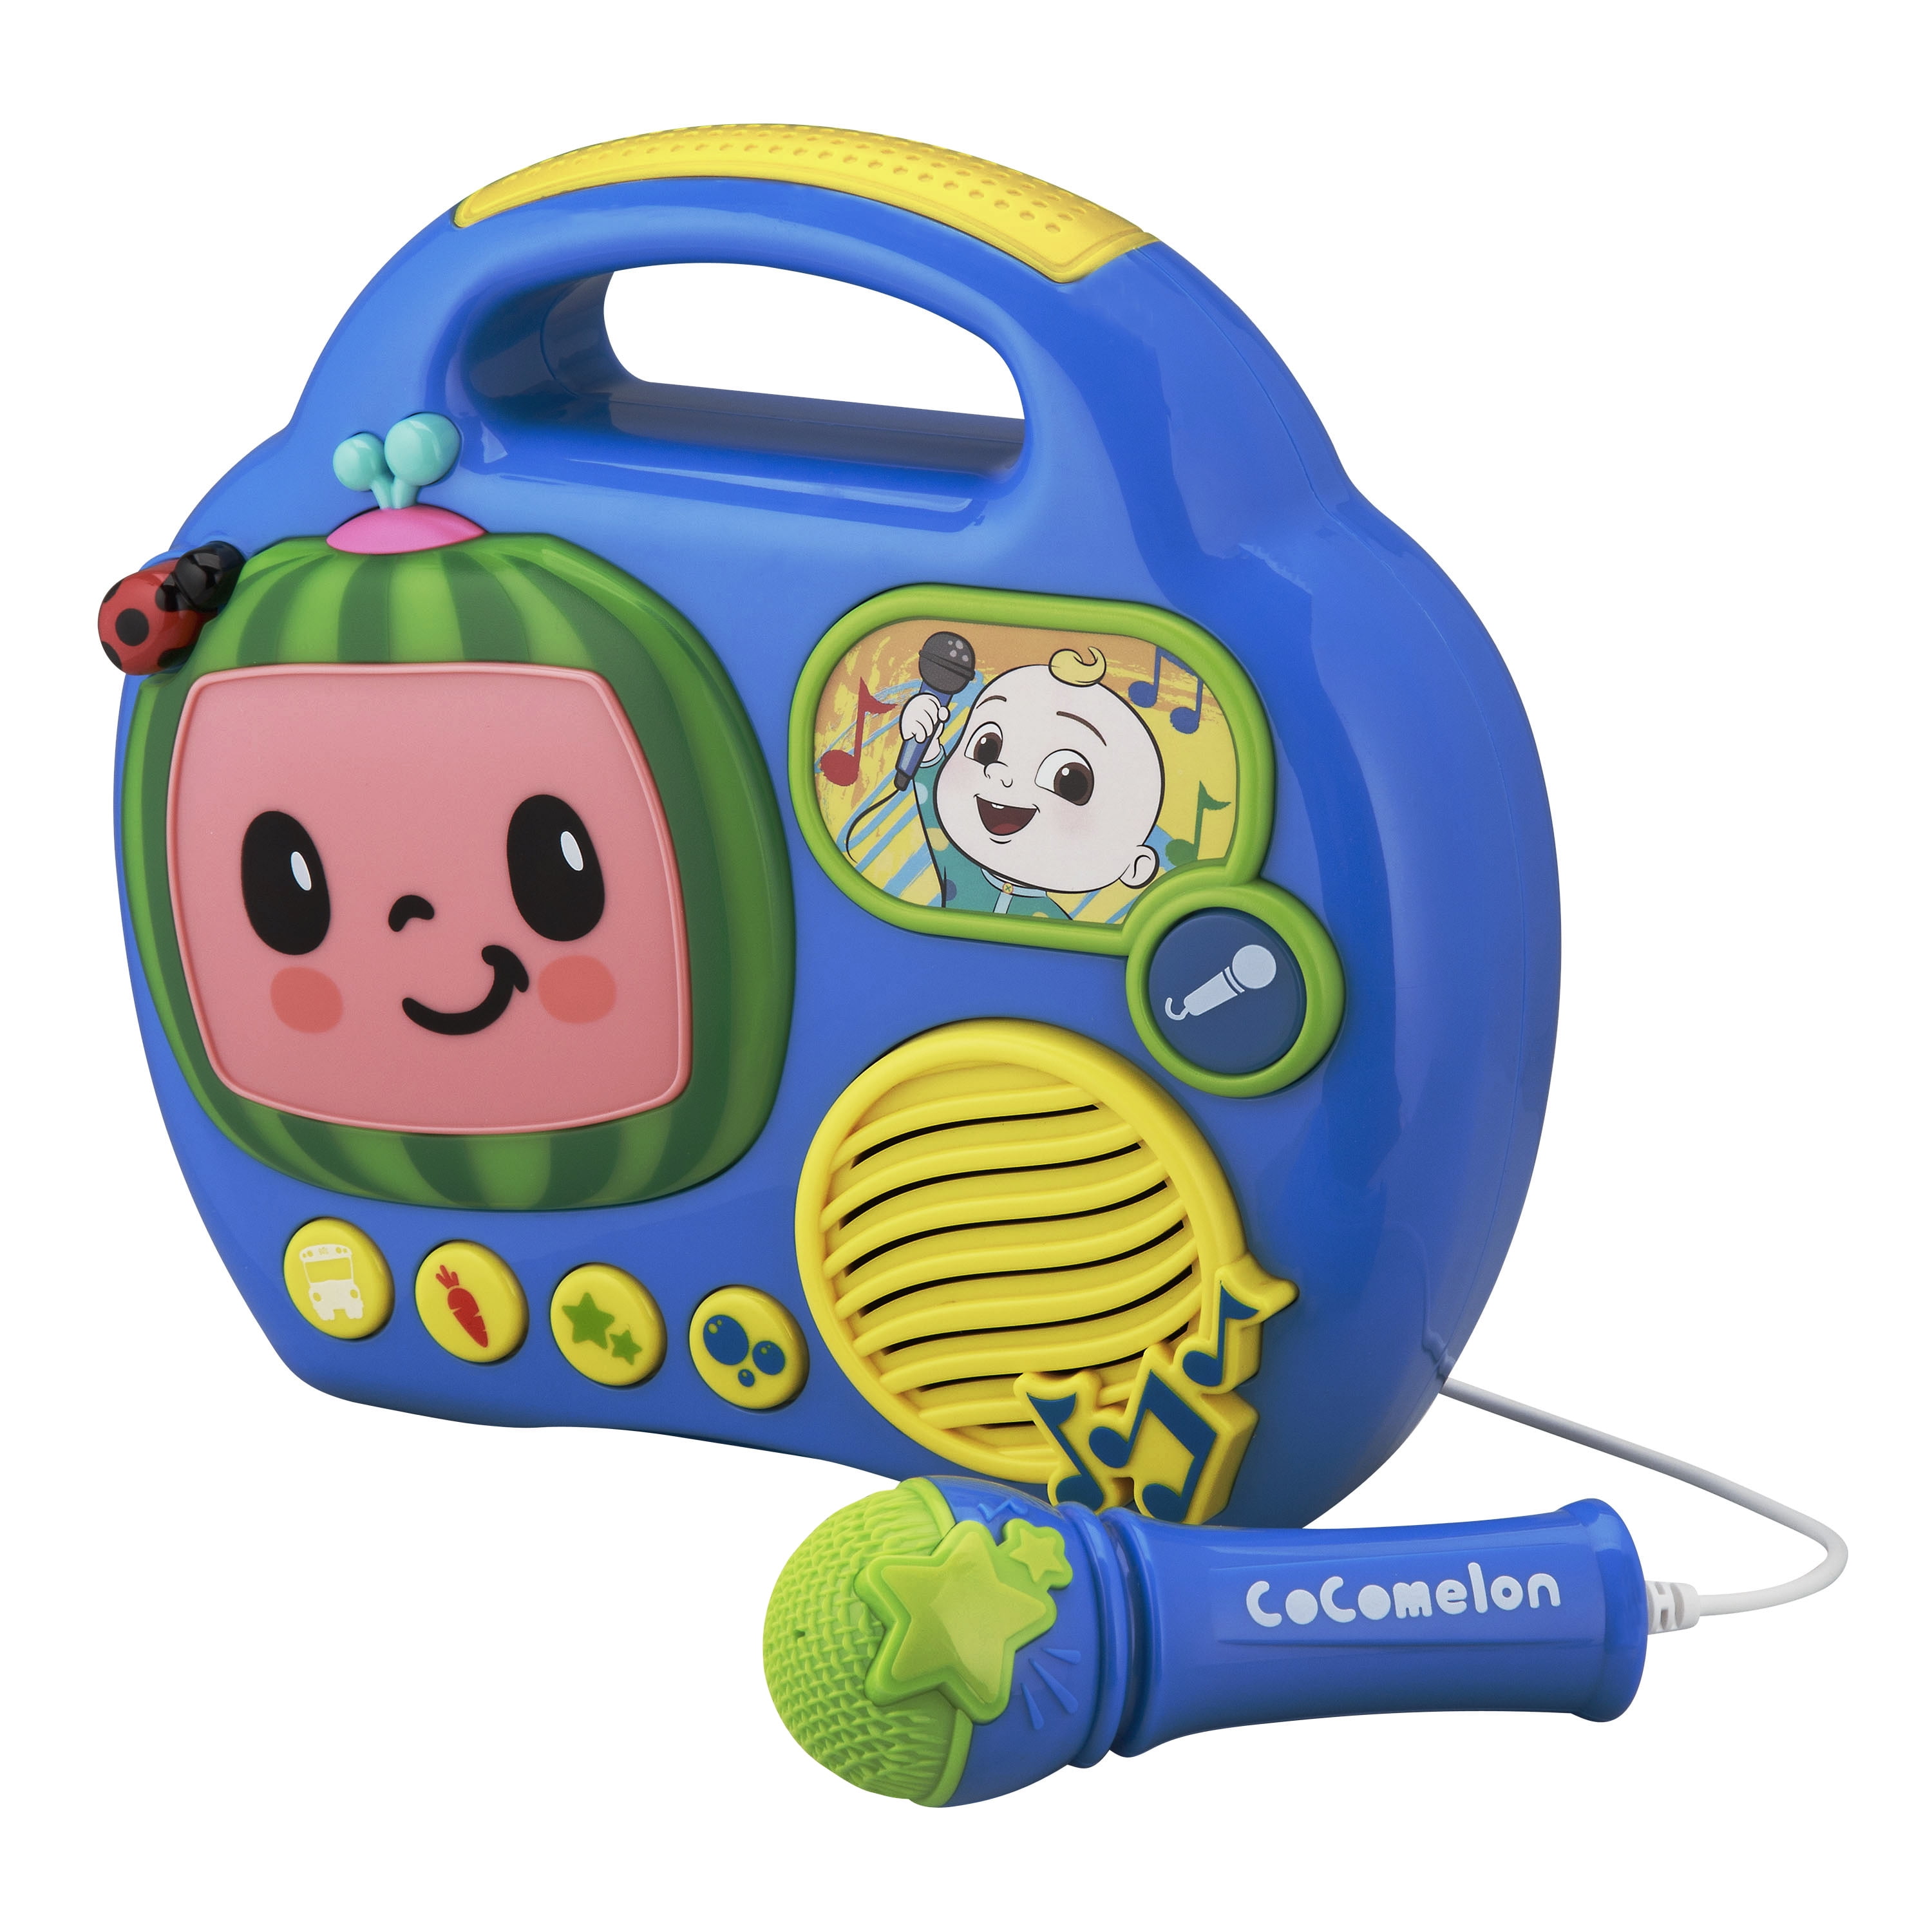 Cocomelon Sing Along Toy Boombox With Real Working Mic for Kids 18 Months  and Up.